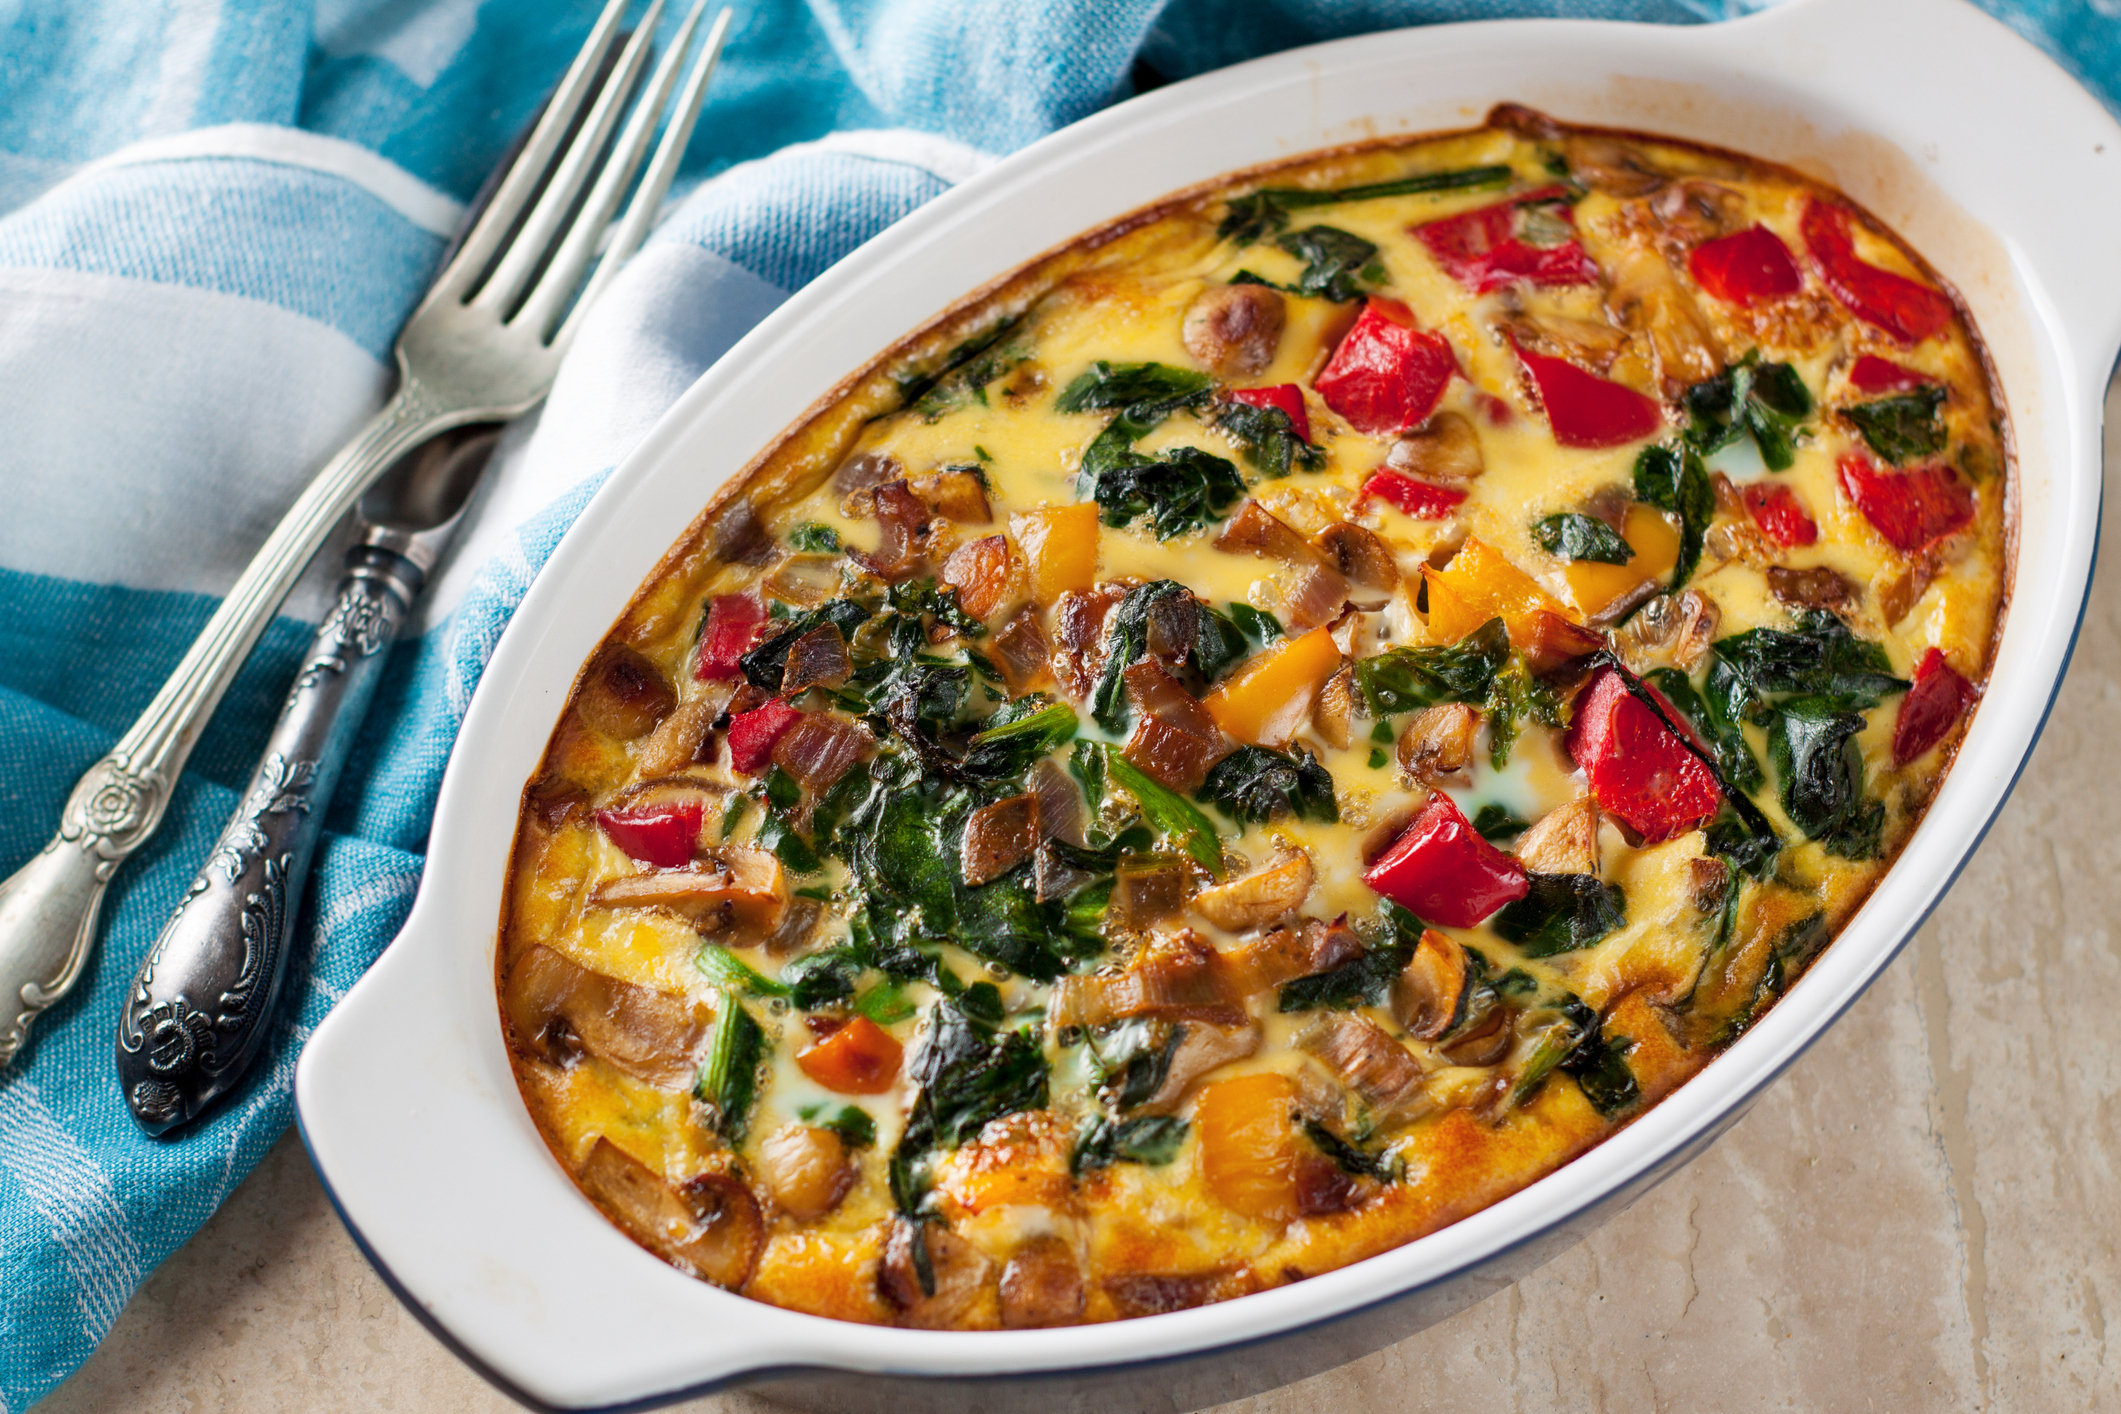 Celebrate World Egg Day with Low-Carb and Keto-Friendly Casseroles.